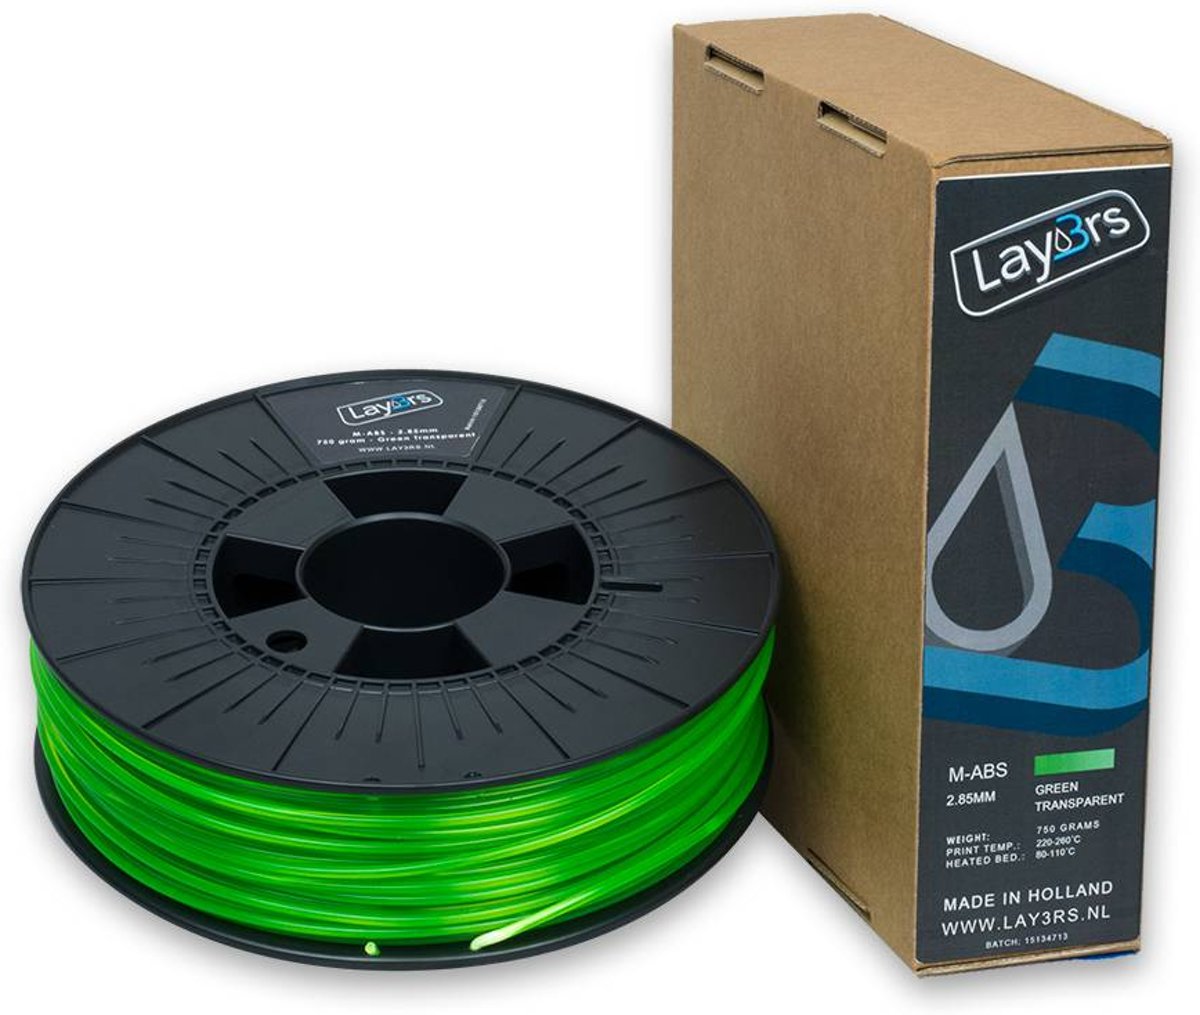 Lay3rs M-ABS Green Transparant - 2.85 mm